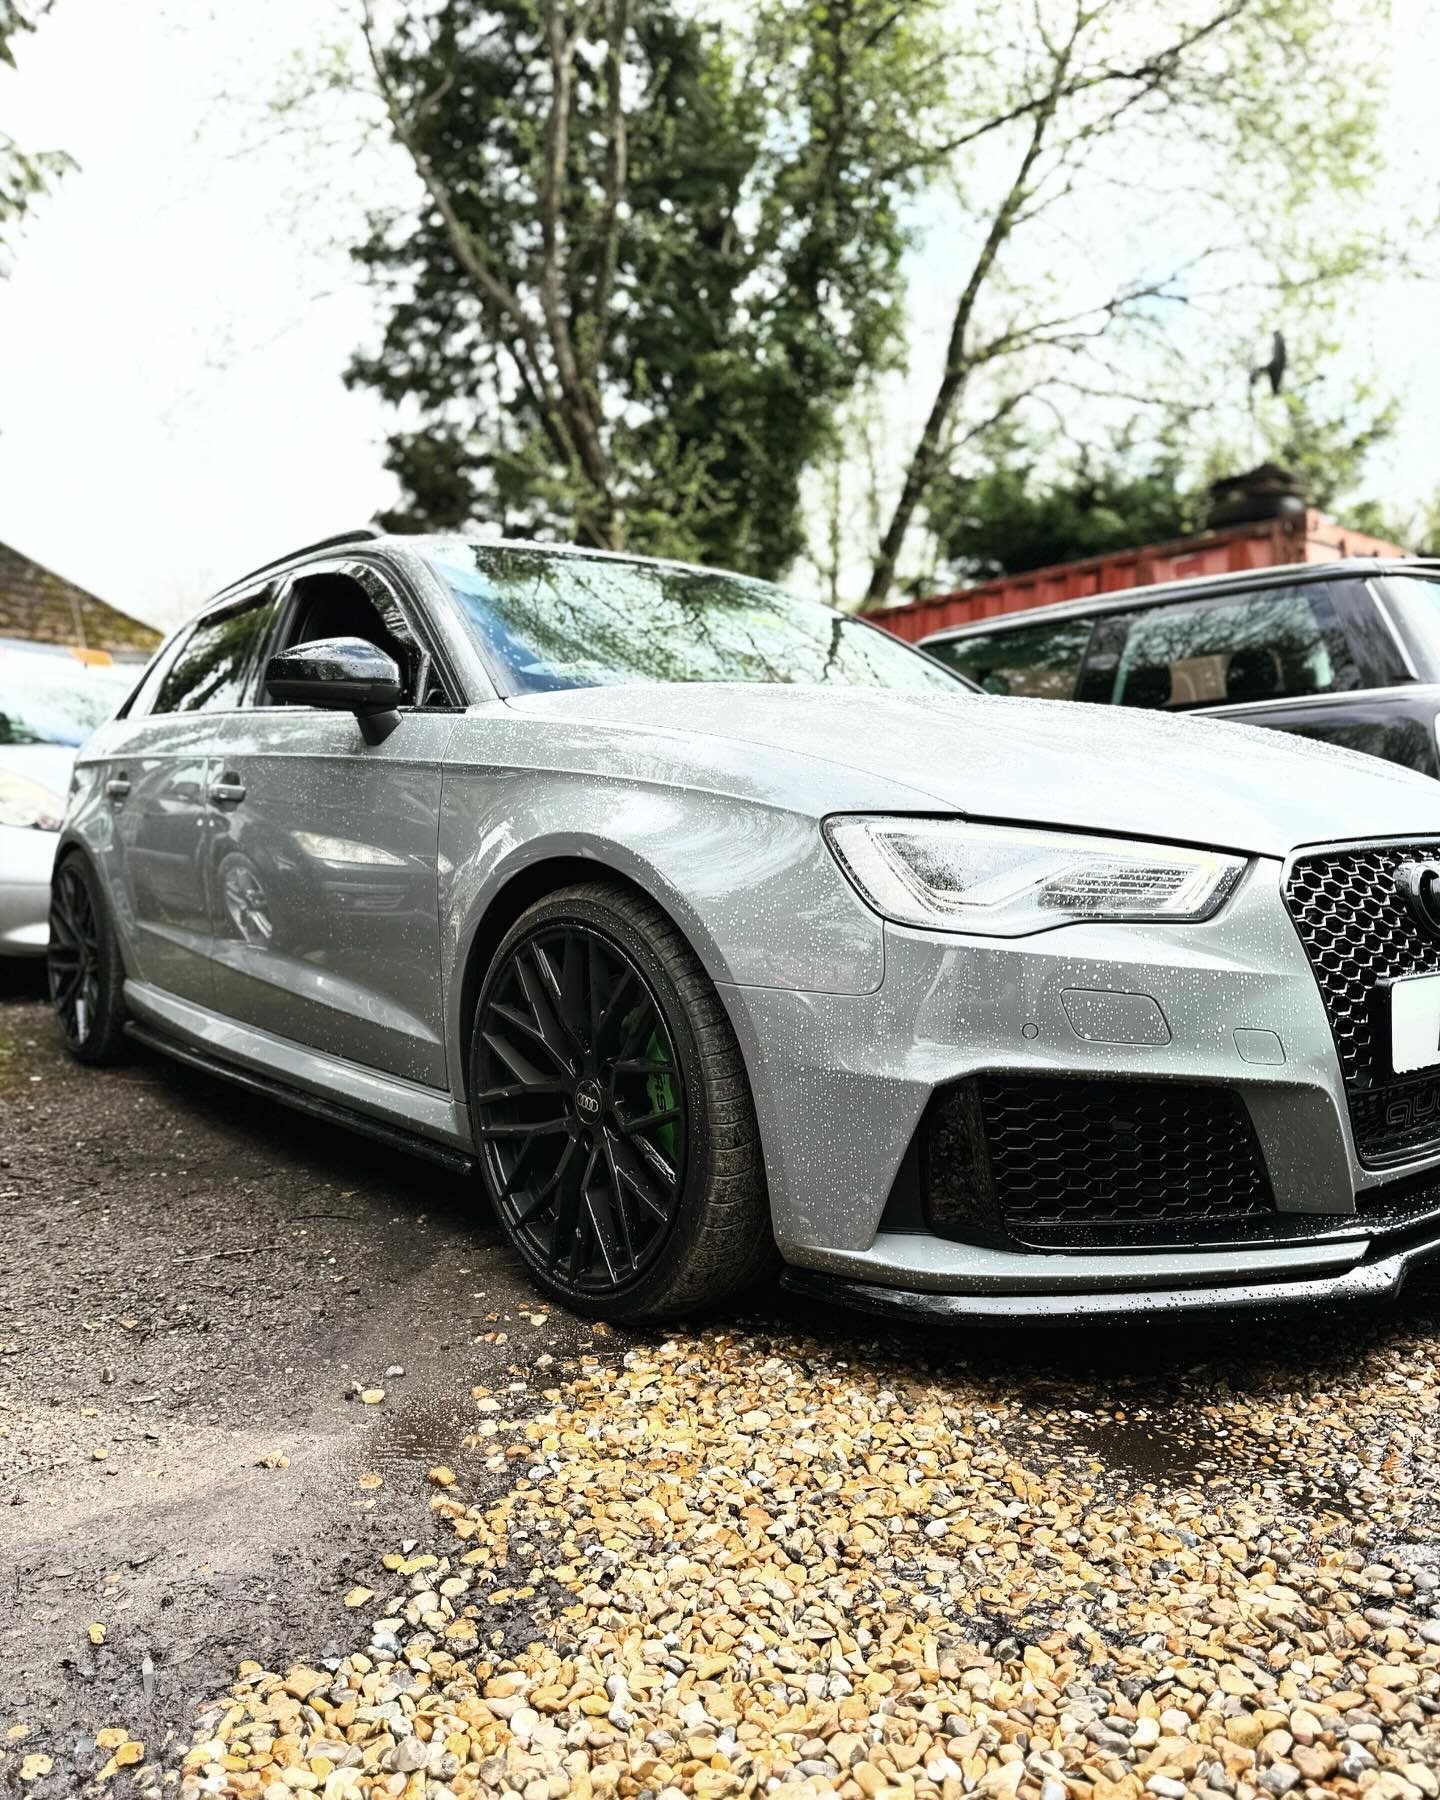 Audi RS3 8V 2.5 TFSI 

⚙ DSG Tune
- Up to 20% faster shift changes
- Increased power and torque
- Smoother and quicker shifts
- More efficiency and economy
__________________________________________
💻 Custom Software
📈 Performance
🌿 Economy
💥 Pop